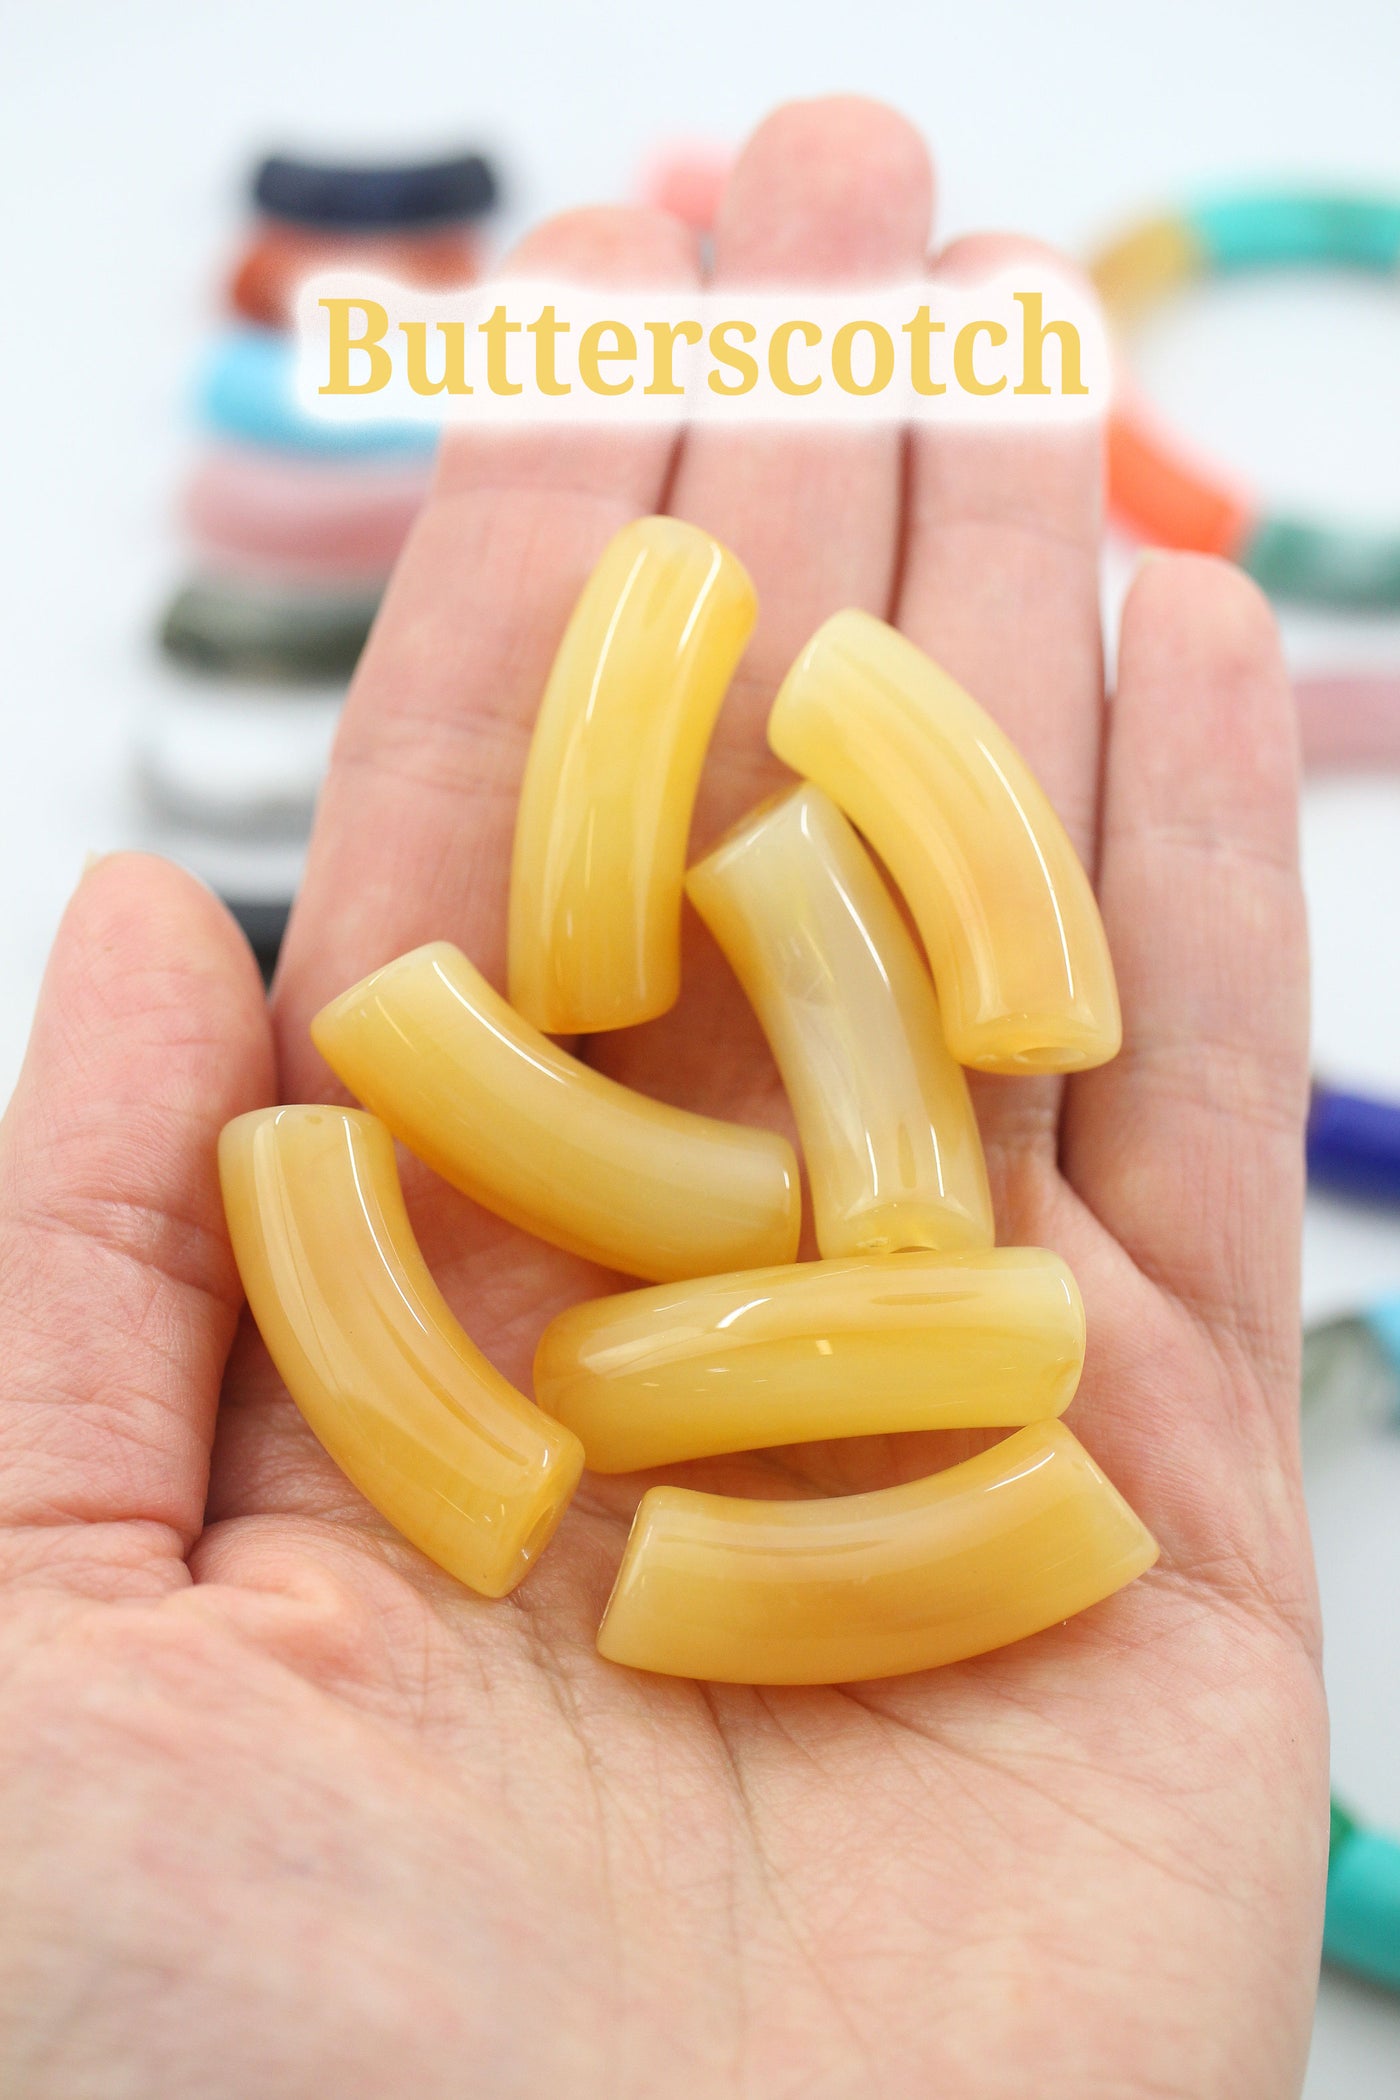 Butterscotch Acrylic Bamboo Beads, Curved Tube Beads, 12mm Colorful Bangle Beads